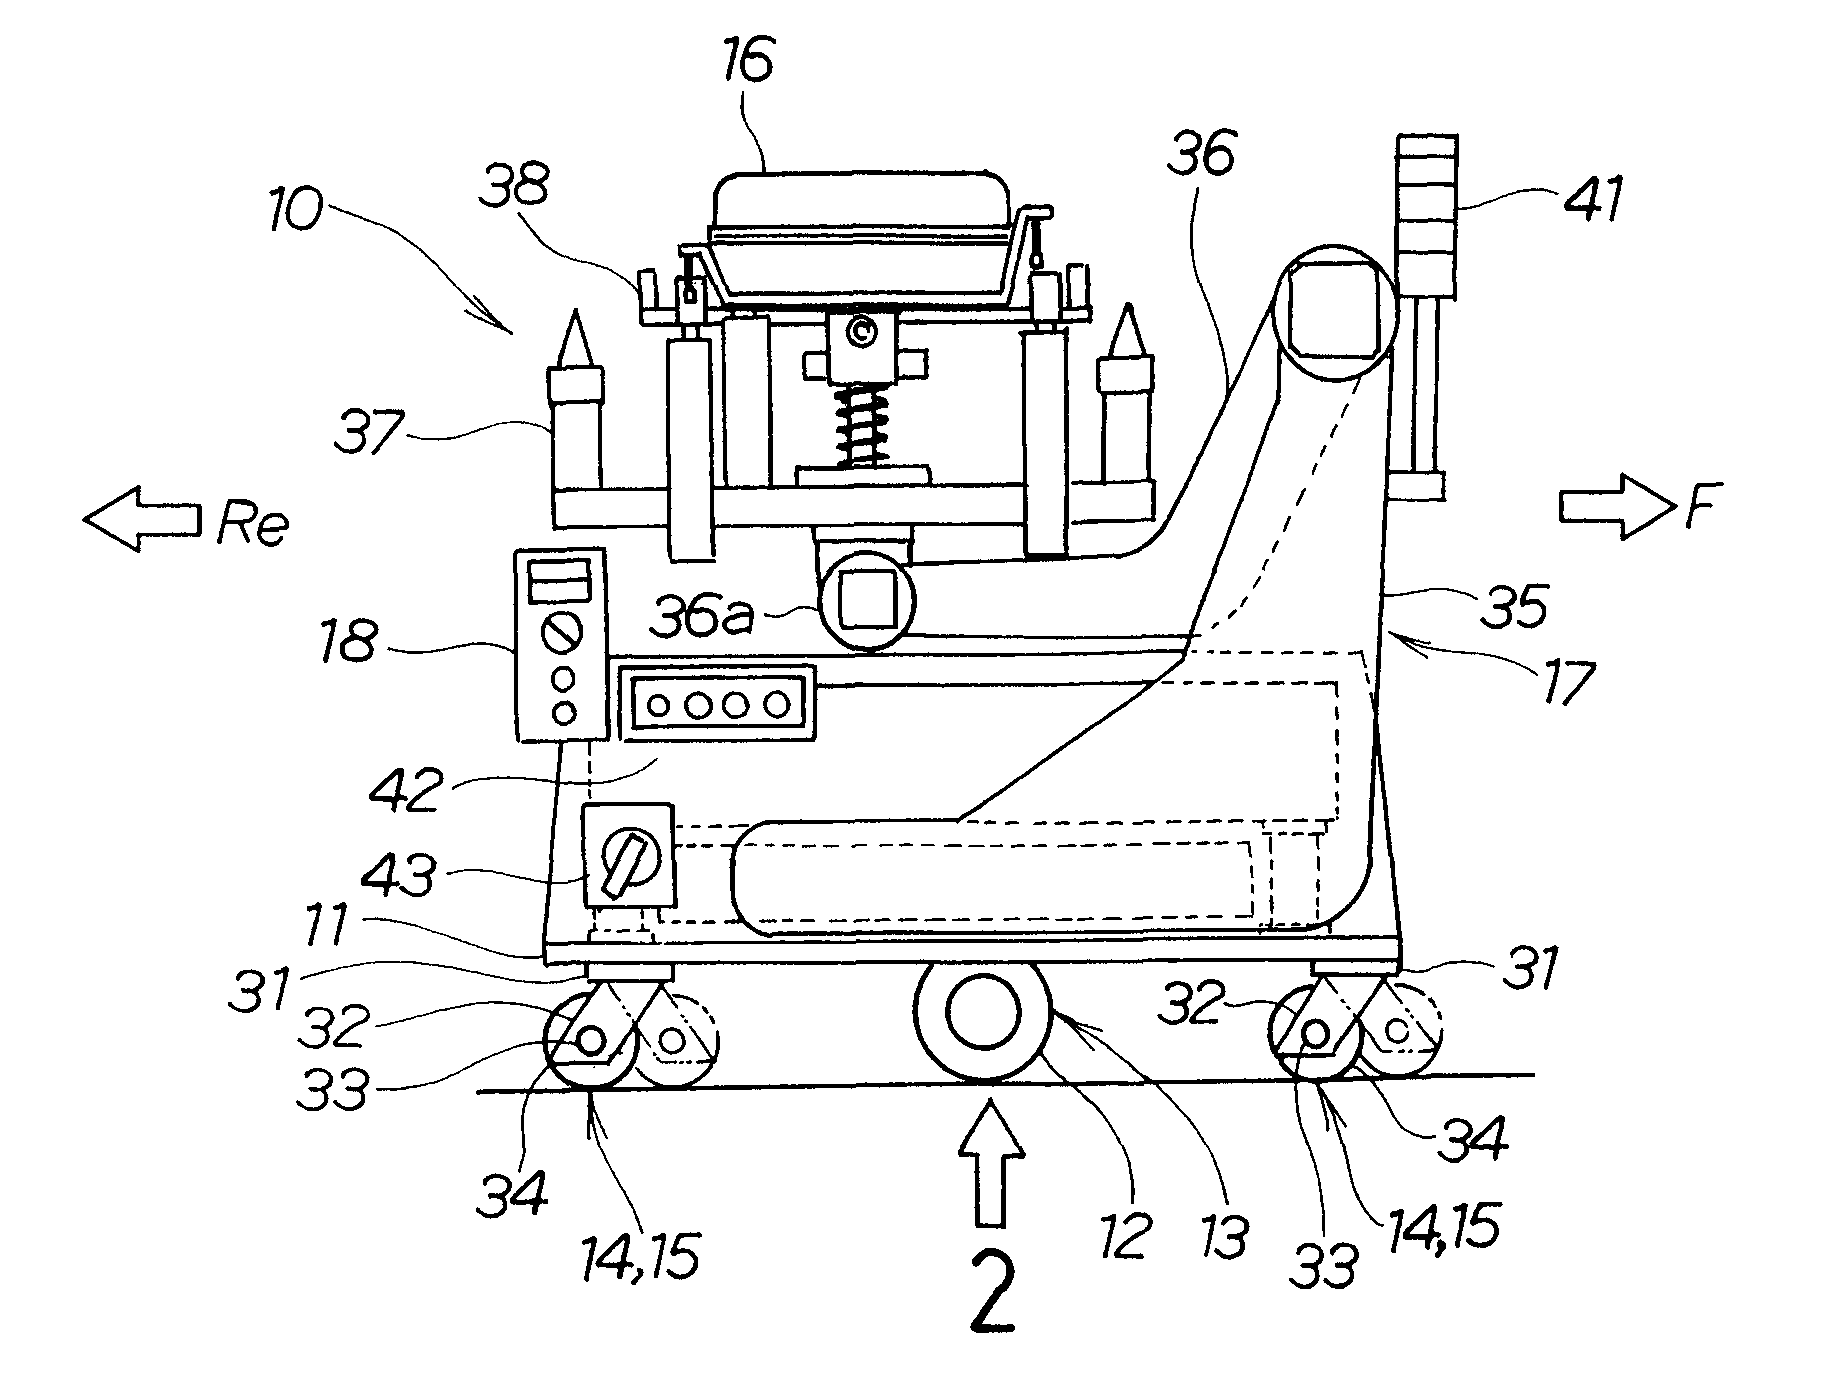 Travel control method for self-propelled carriage